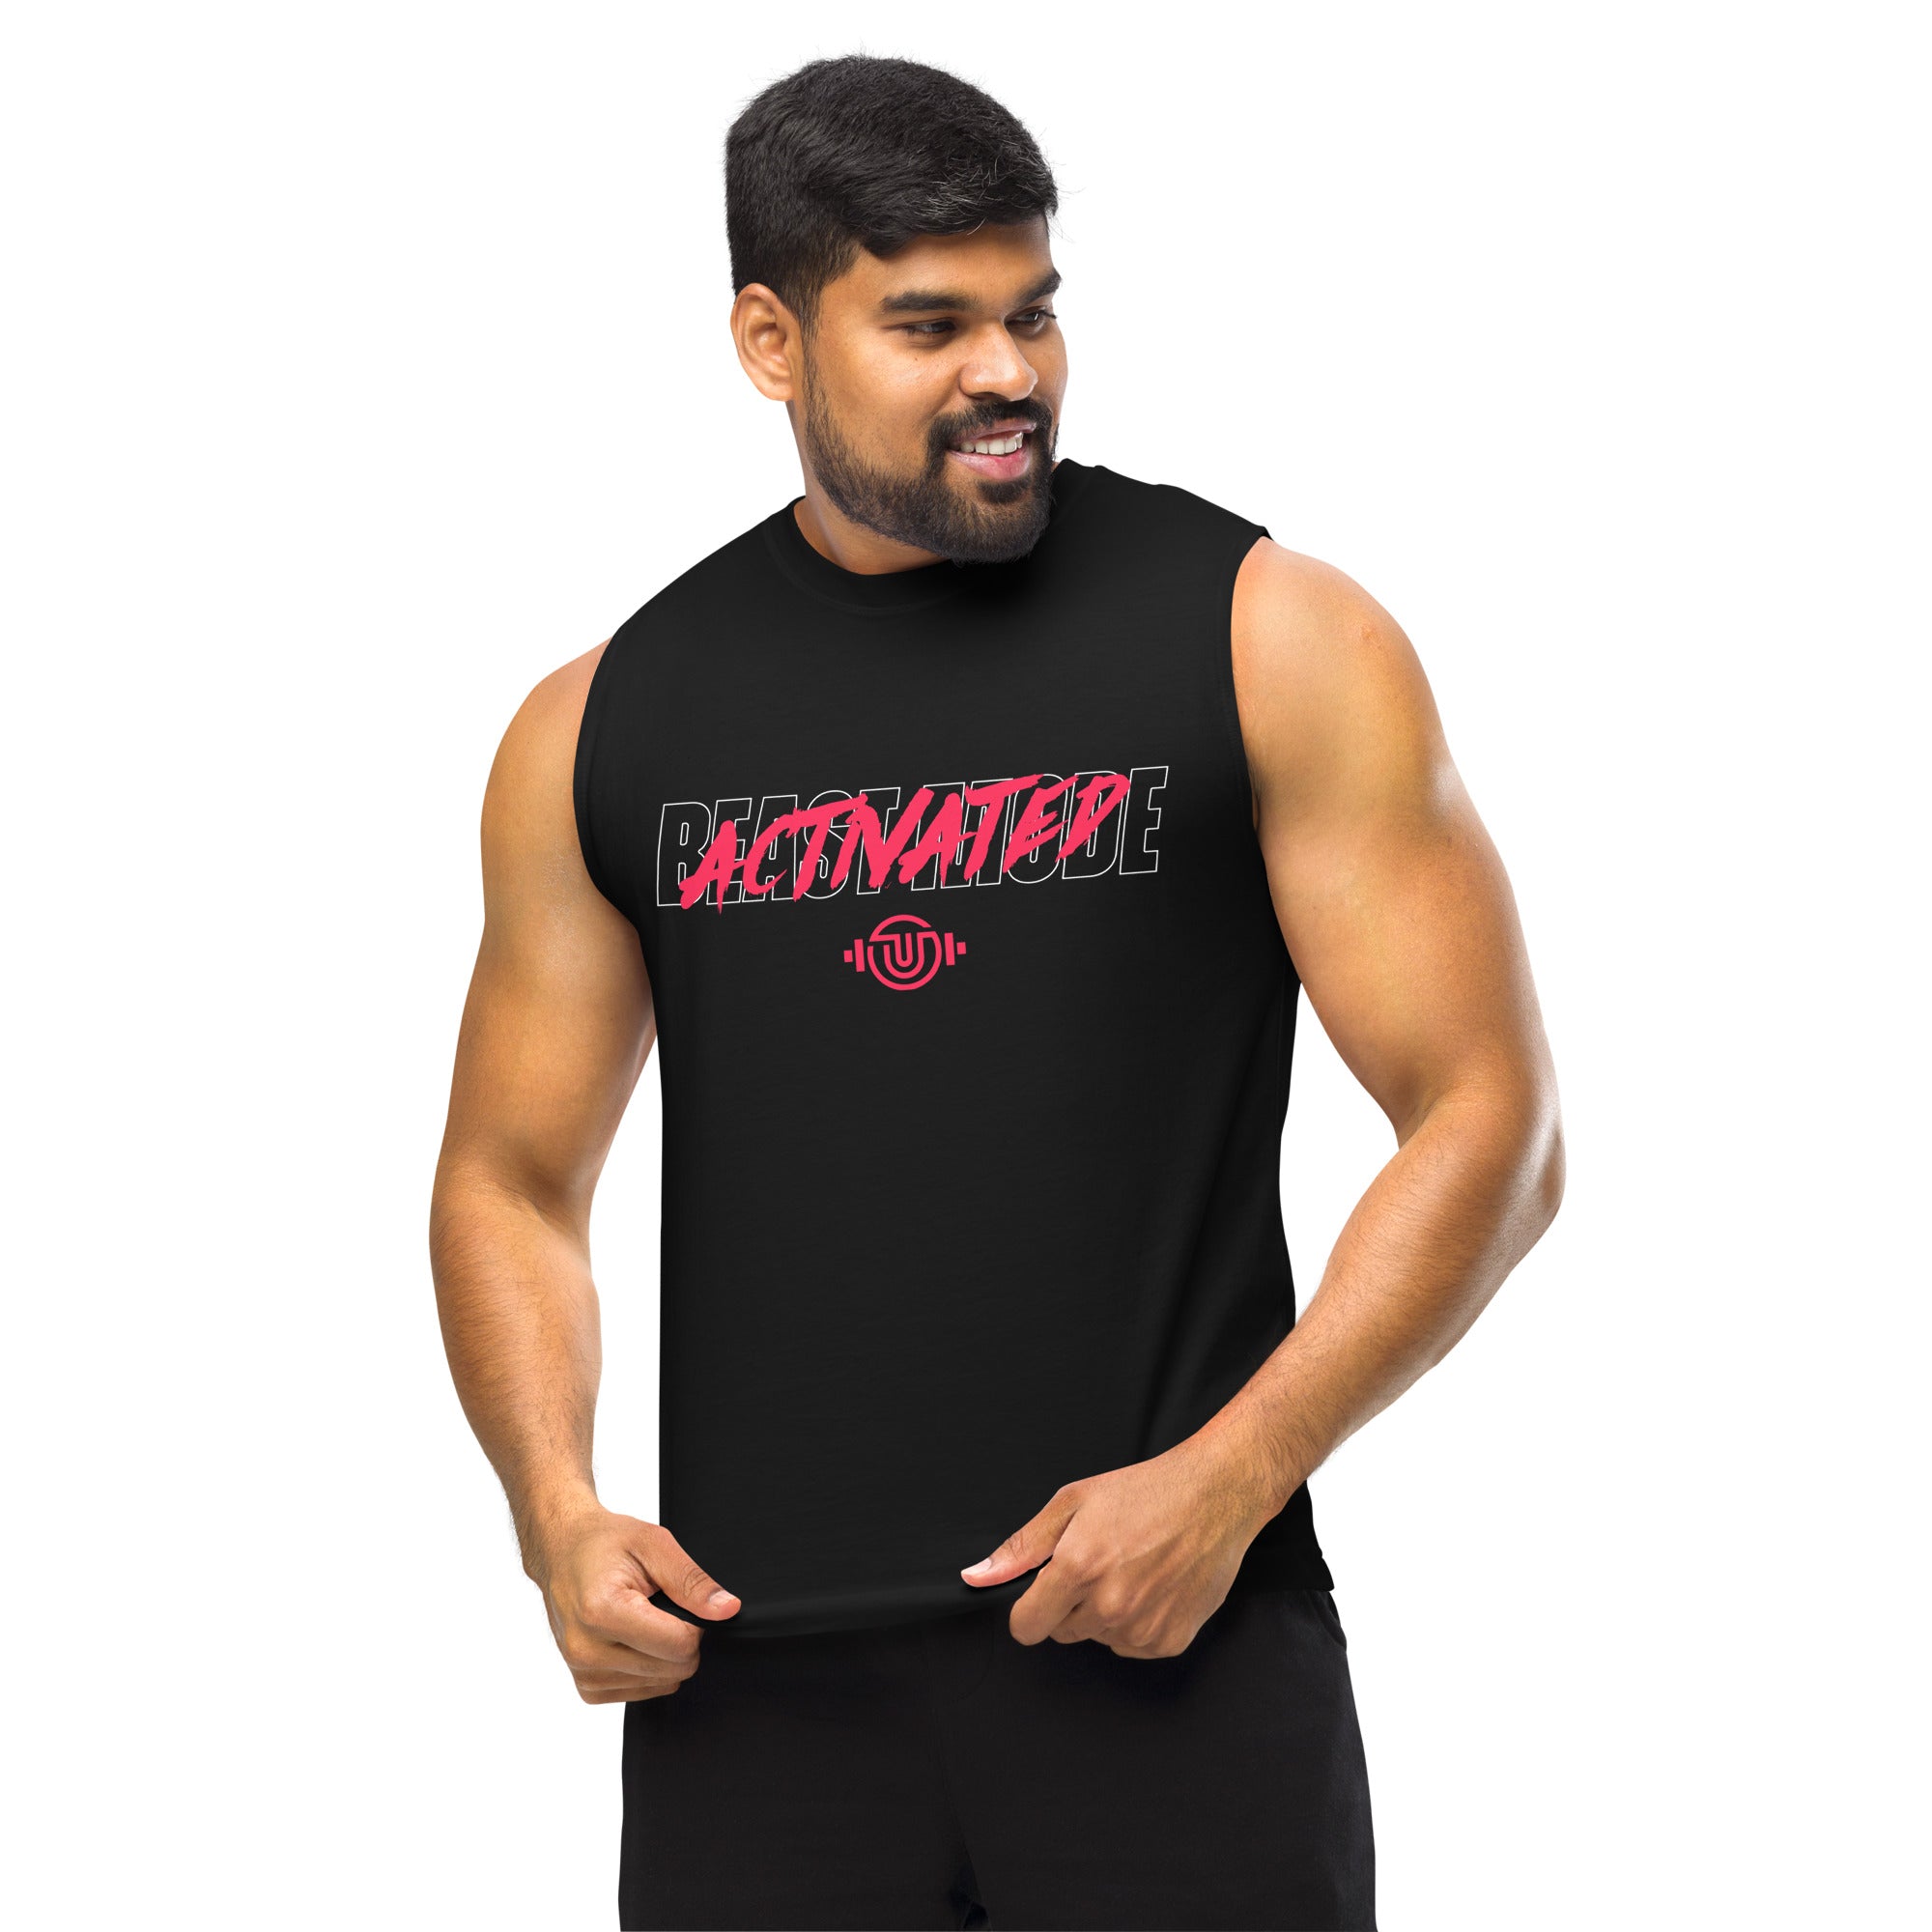 BEASTMODE ACTIVATED WPFG23 Muscle Shirt